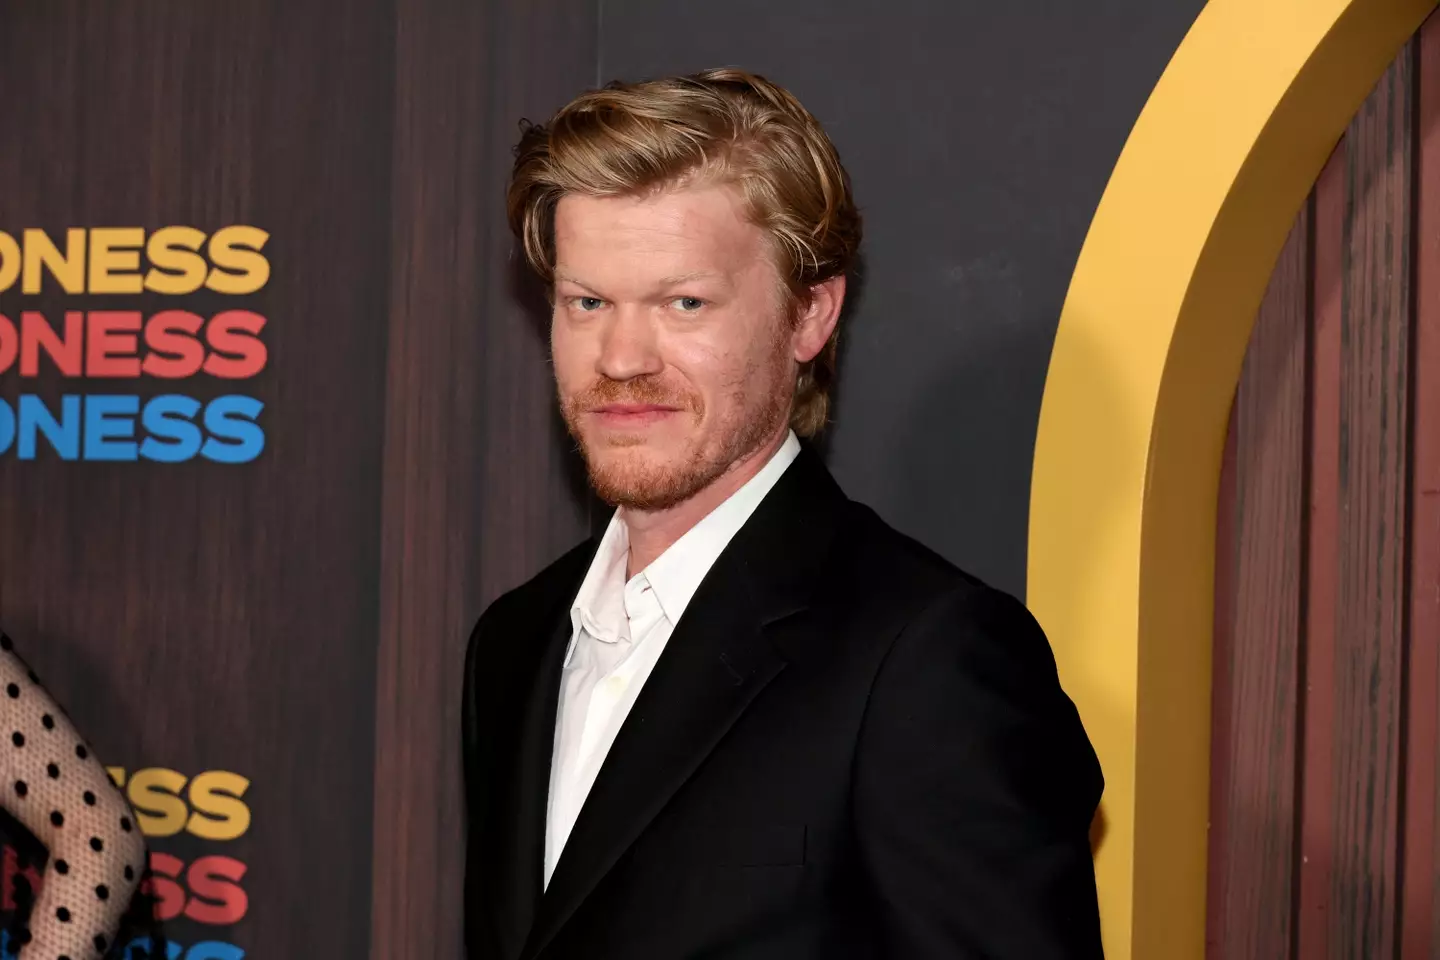 Actor Jesse Plemons, the actor has been in the industry for over 20 years and has been some of the biggest shows and films in recent memory. (Dia Dipasupil/Getty Images)